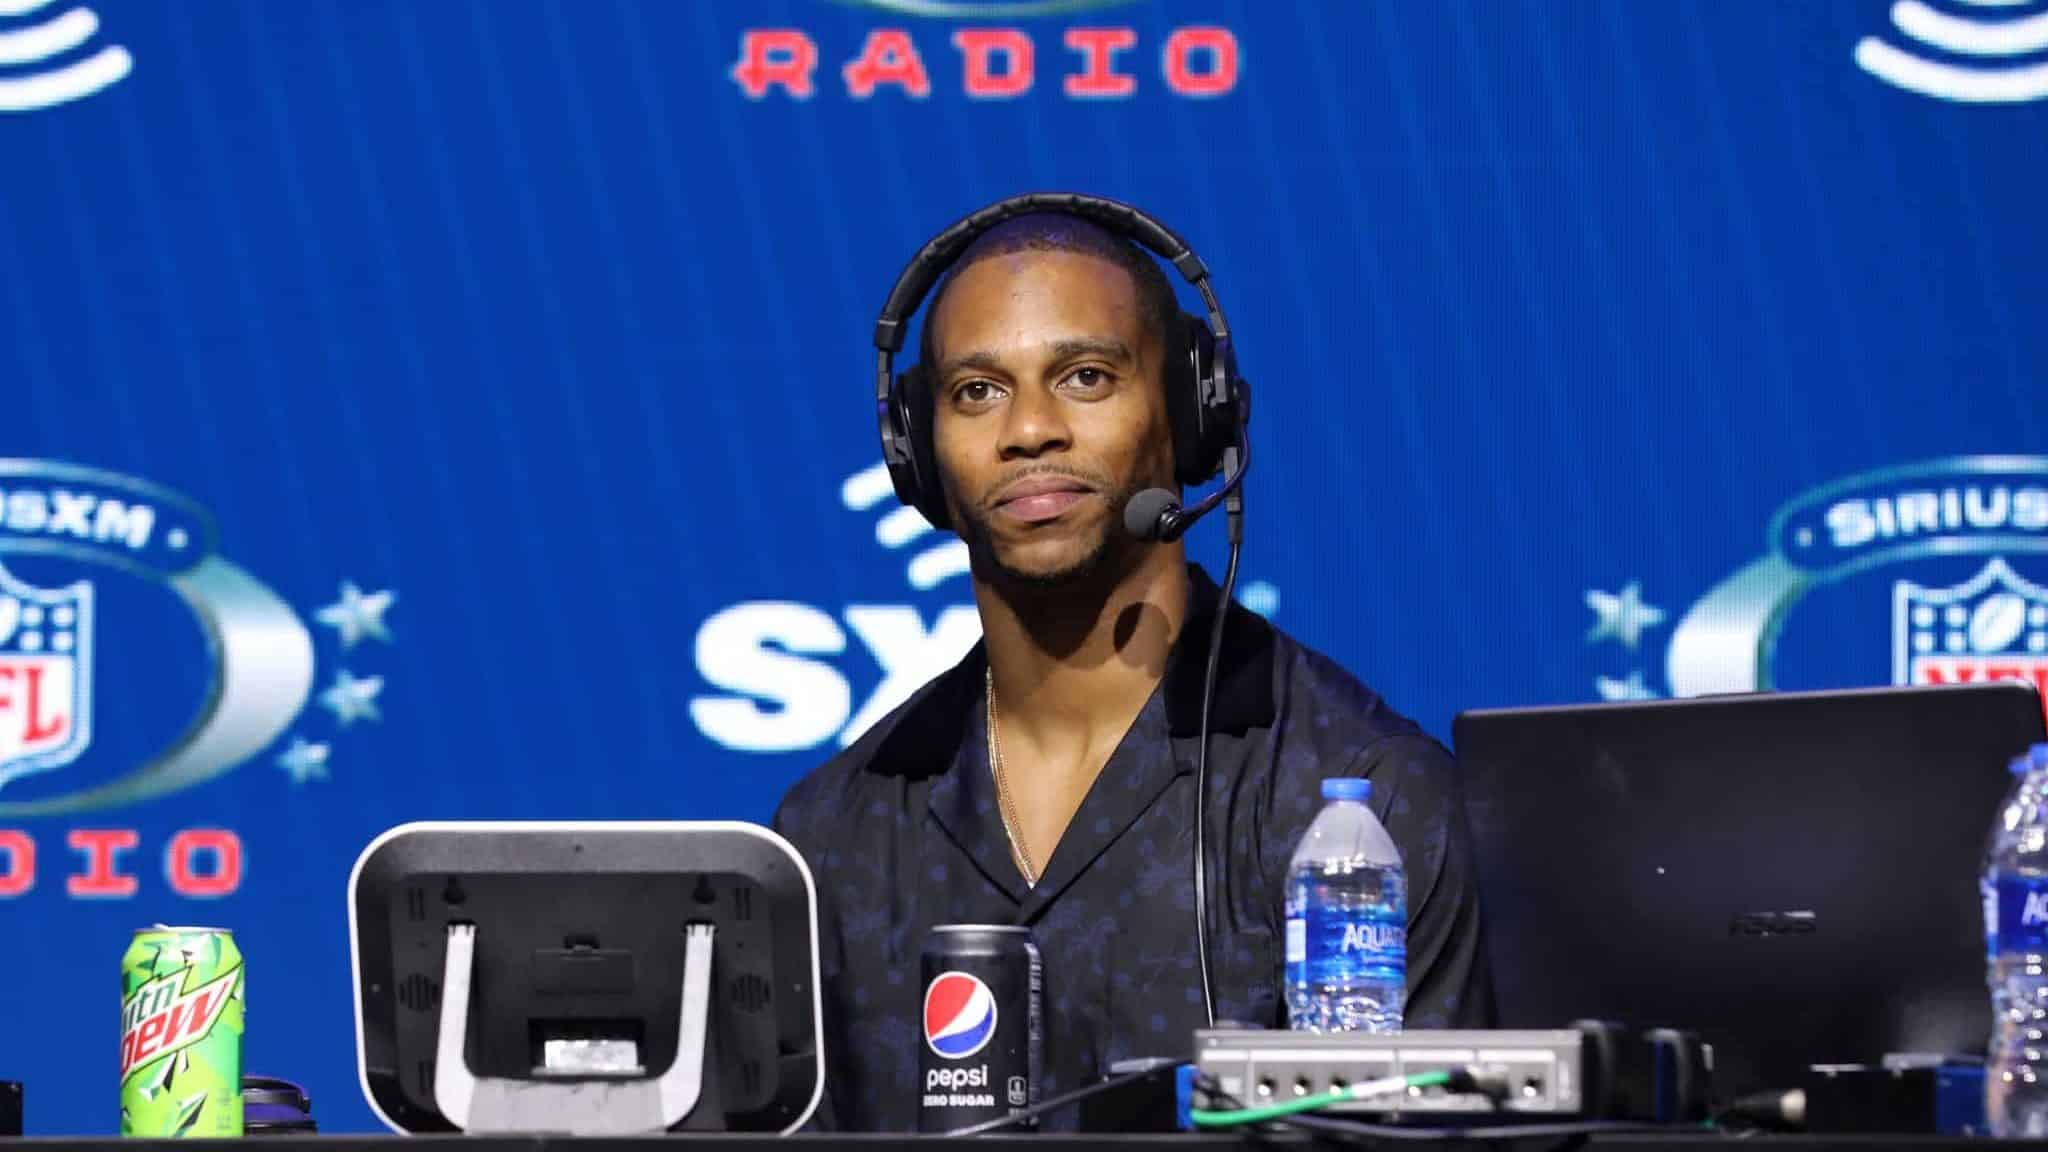 MIAMI, FLORIDA - JANUARY 29: Former NFL player Victor Cruz speaks onstage during day 1 with SiriusXM at Super Bowl LIV on January 29, 2020 in Miami, Florida.